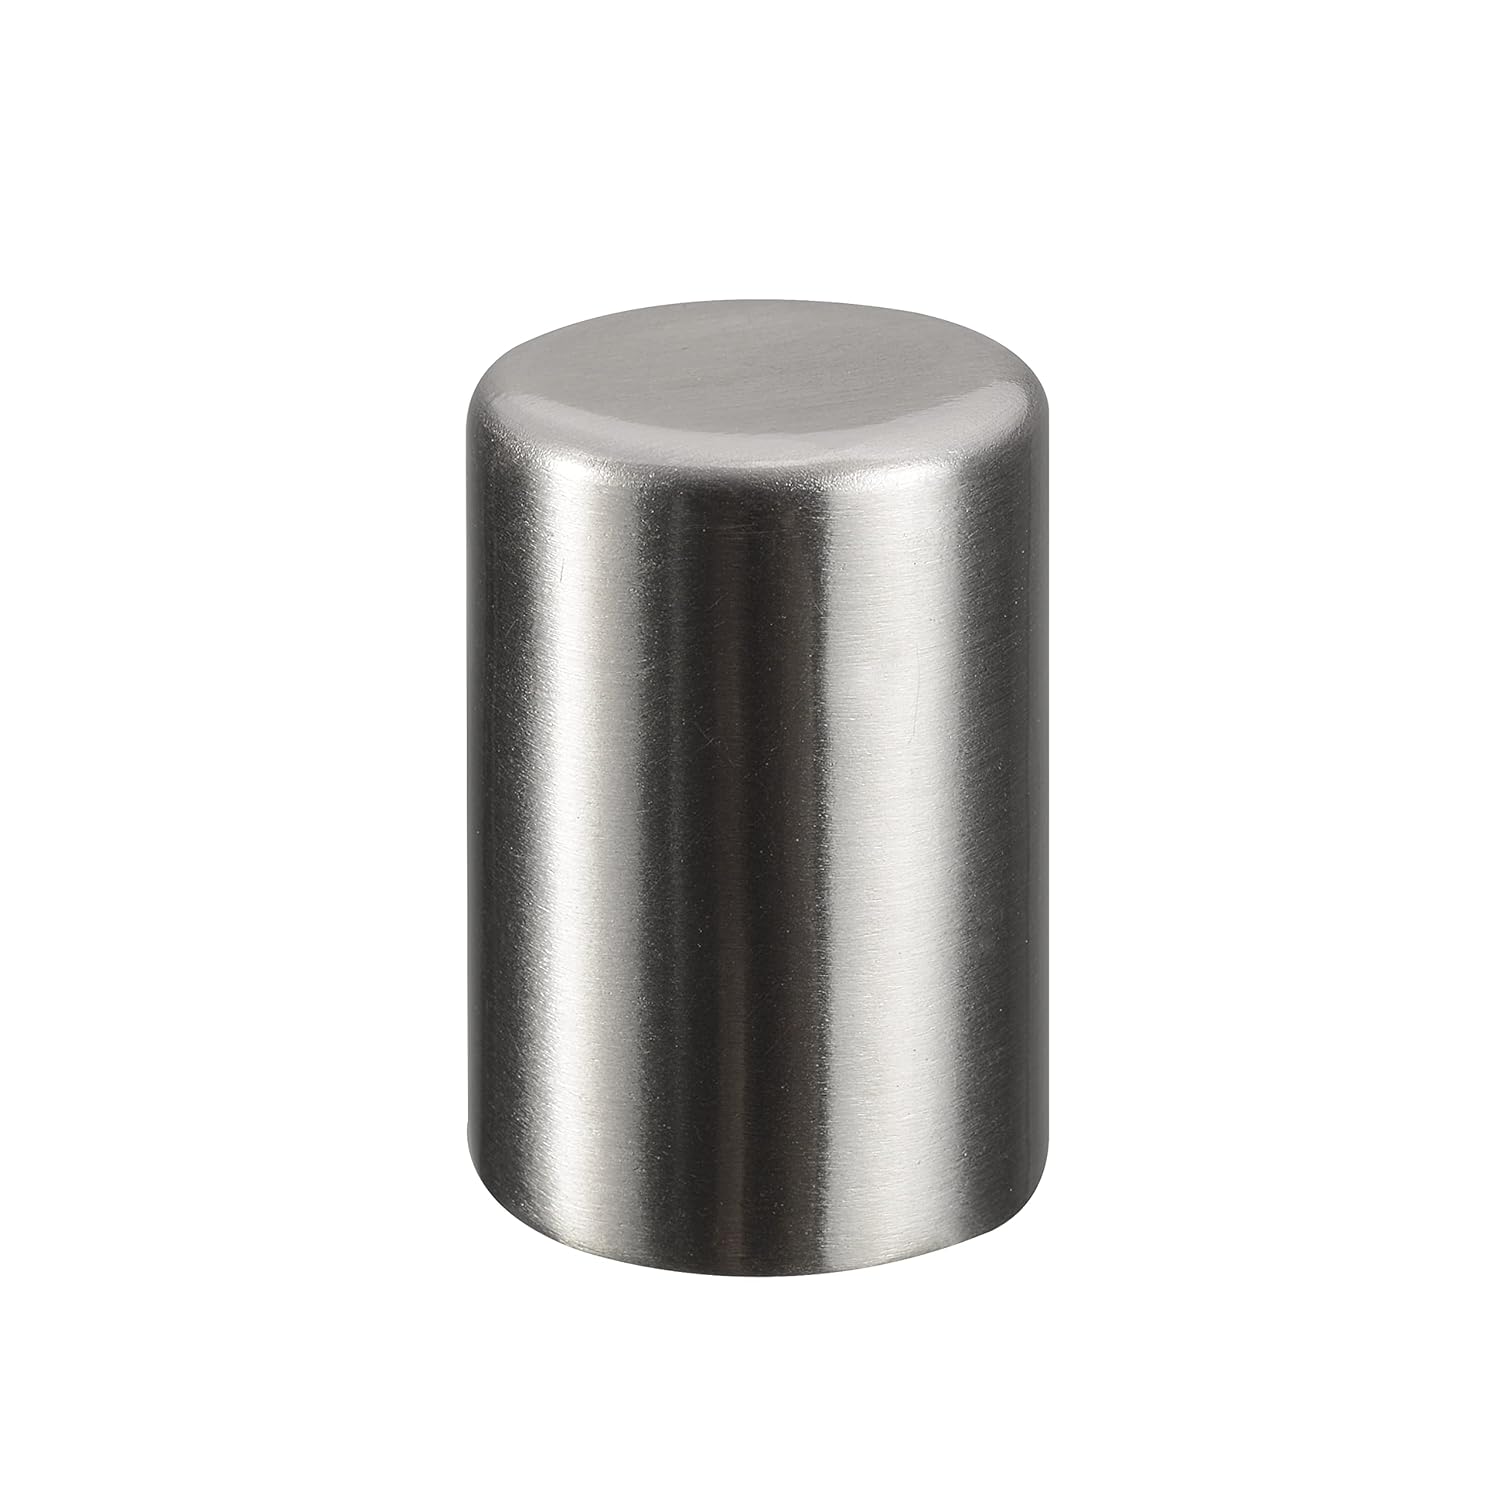 Great Choice Products Brushed Nickel 24043-09-2, Finial For Lamp Shade Finish, 1-1/4" Height, 2Pcs/Pack